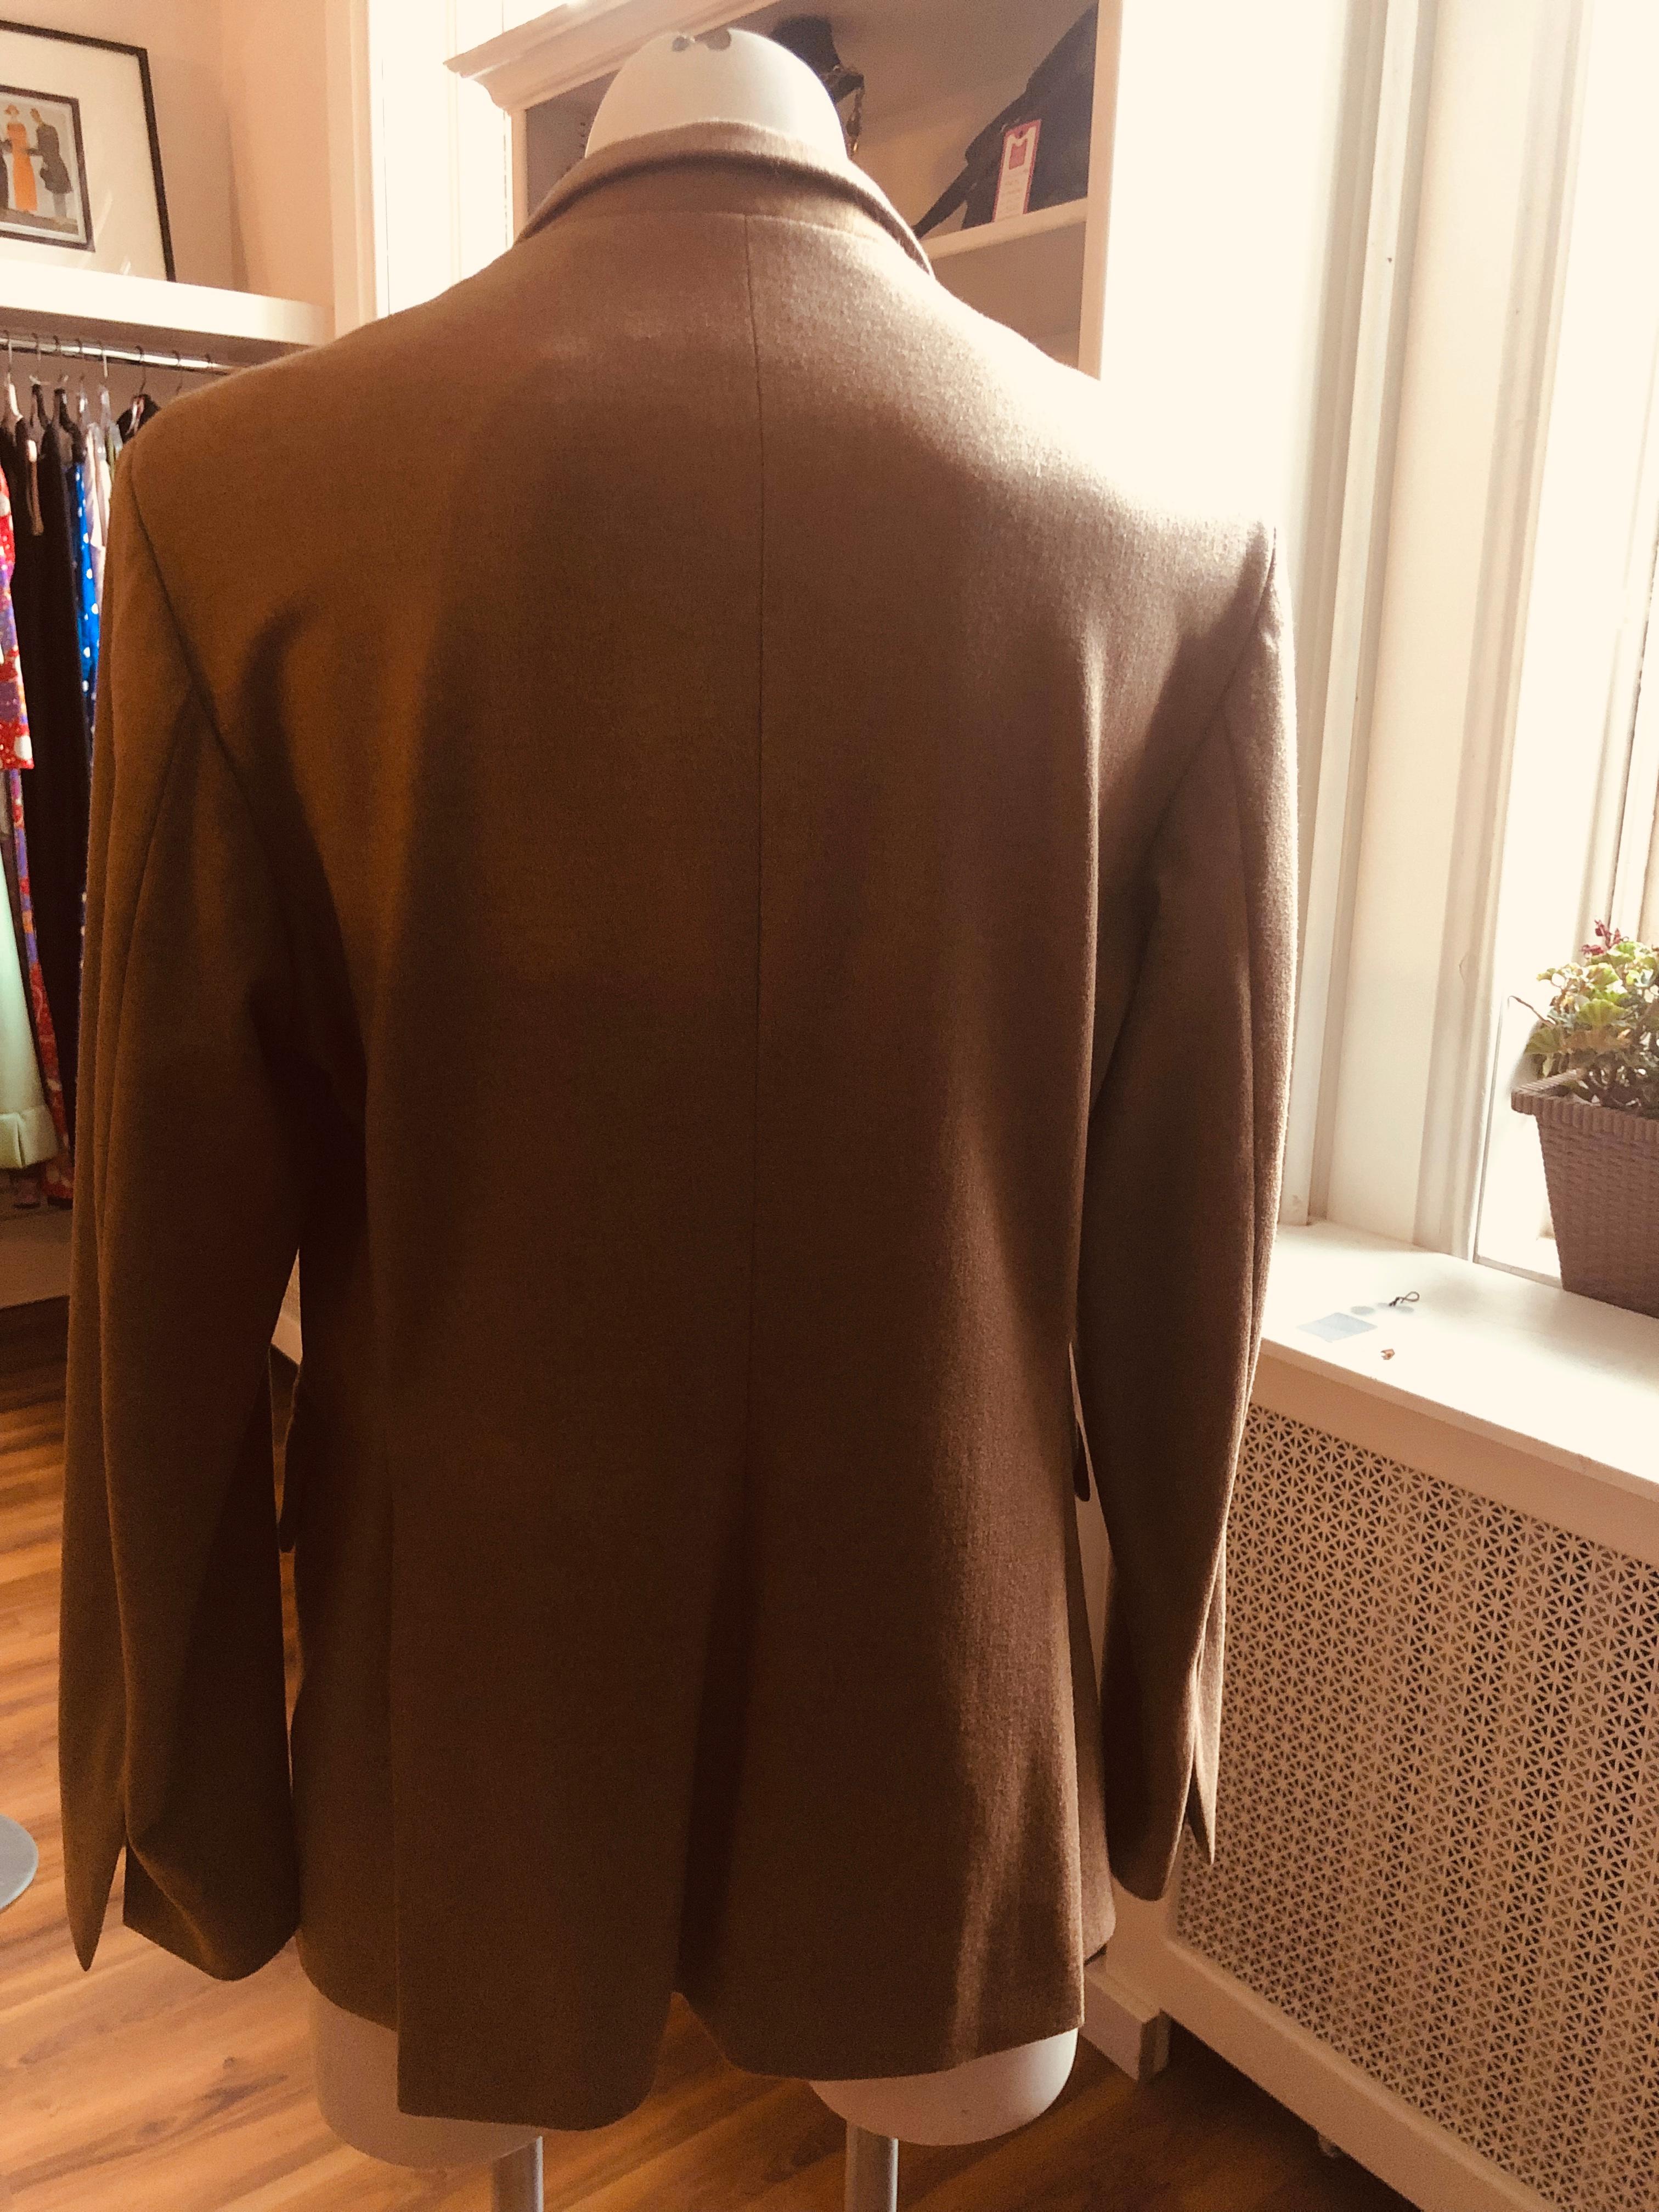 Made in Italy, this 55% cashmere 39% virgin wool blazer is beautifully tailored, with three button front closure, centre vent and overall exquisite design. Absolutely classic and gorgeous!